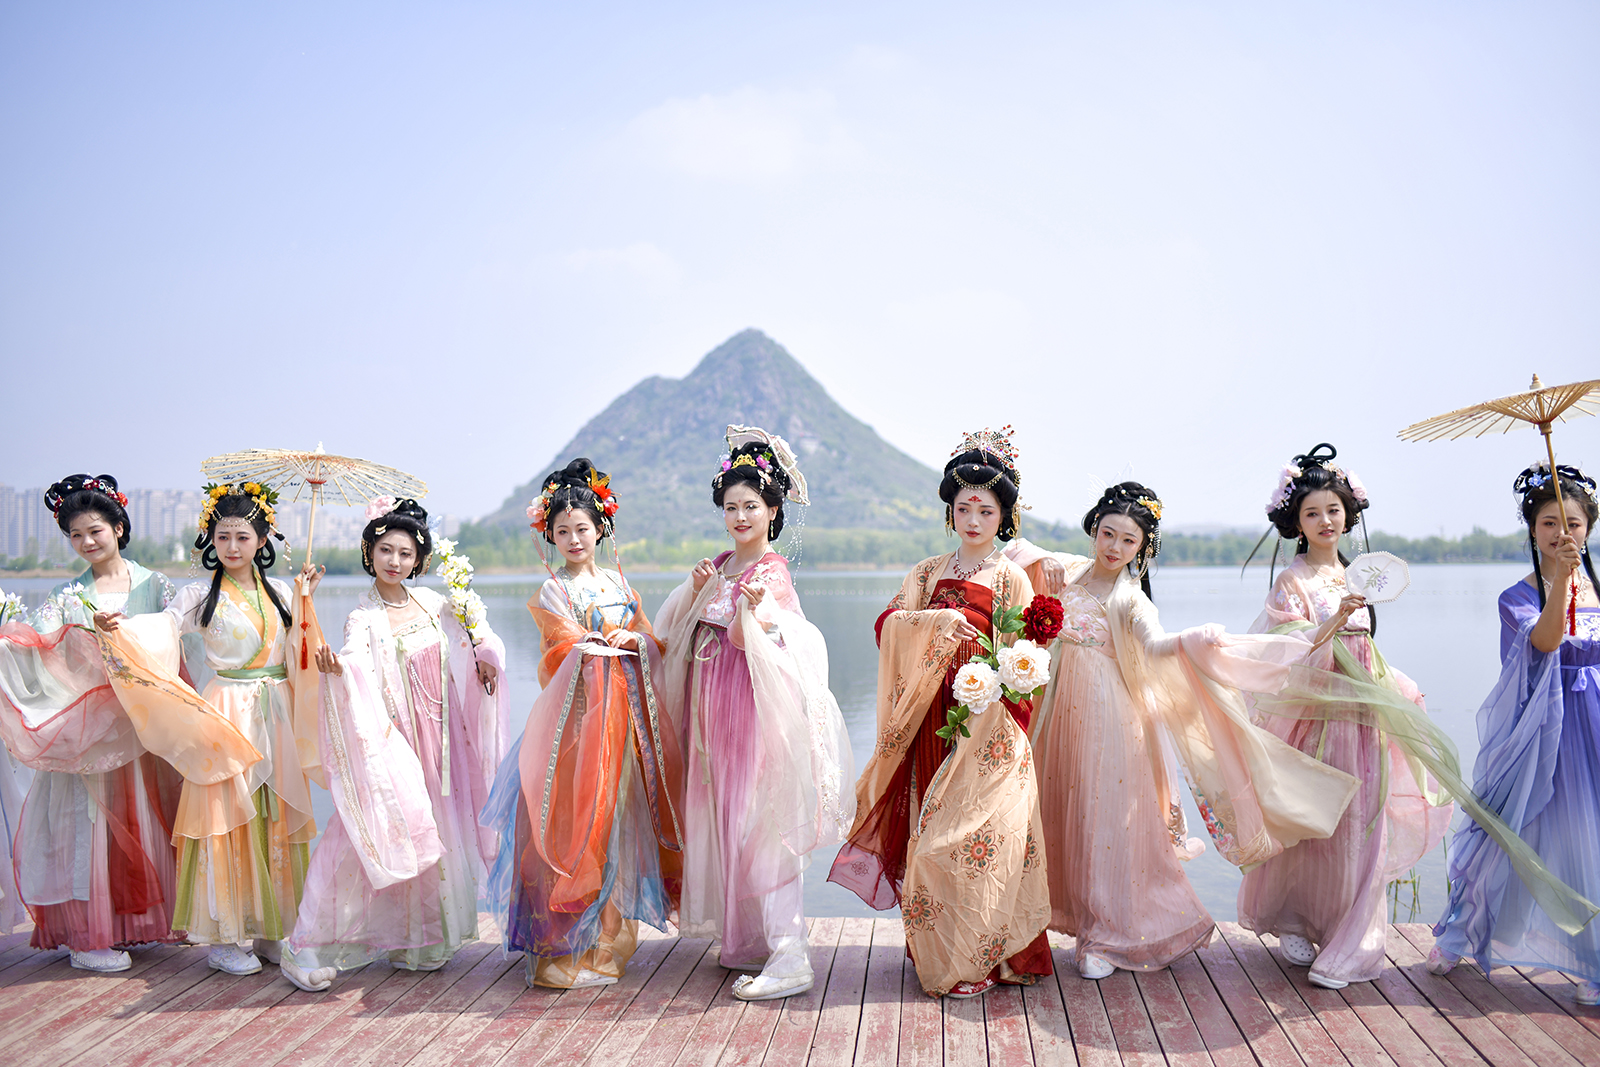 Young women, dressed in hanfu to portray the legendary 